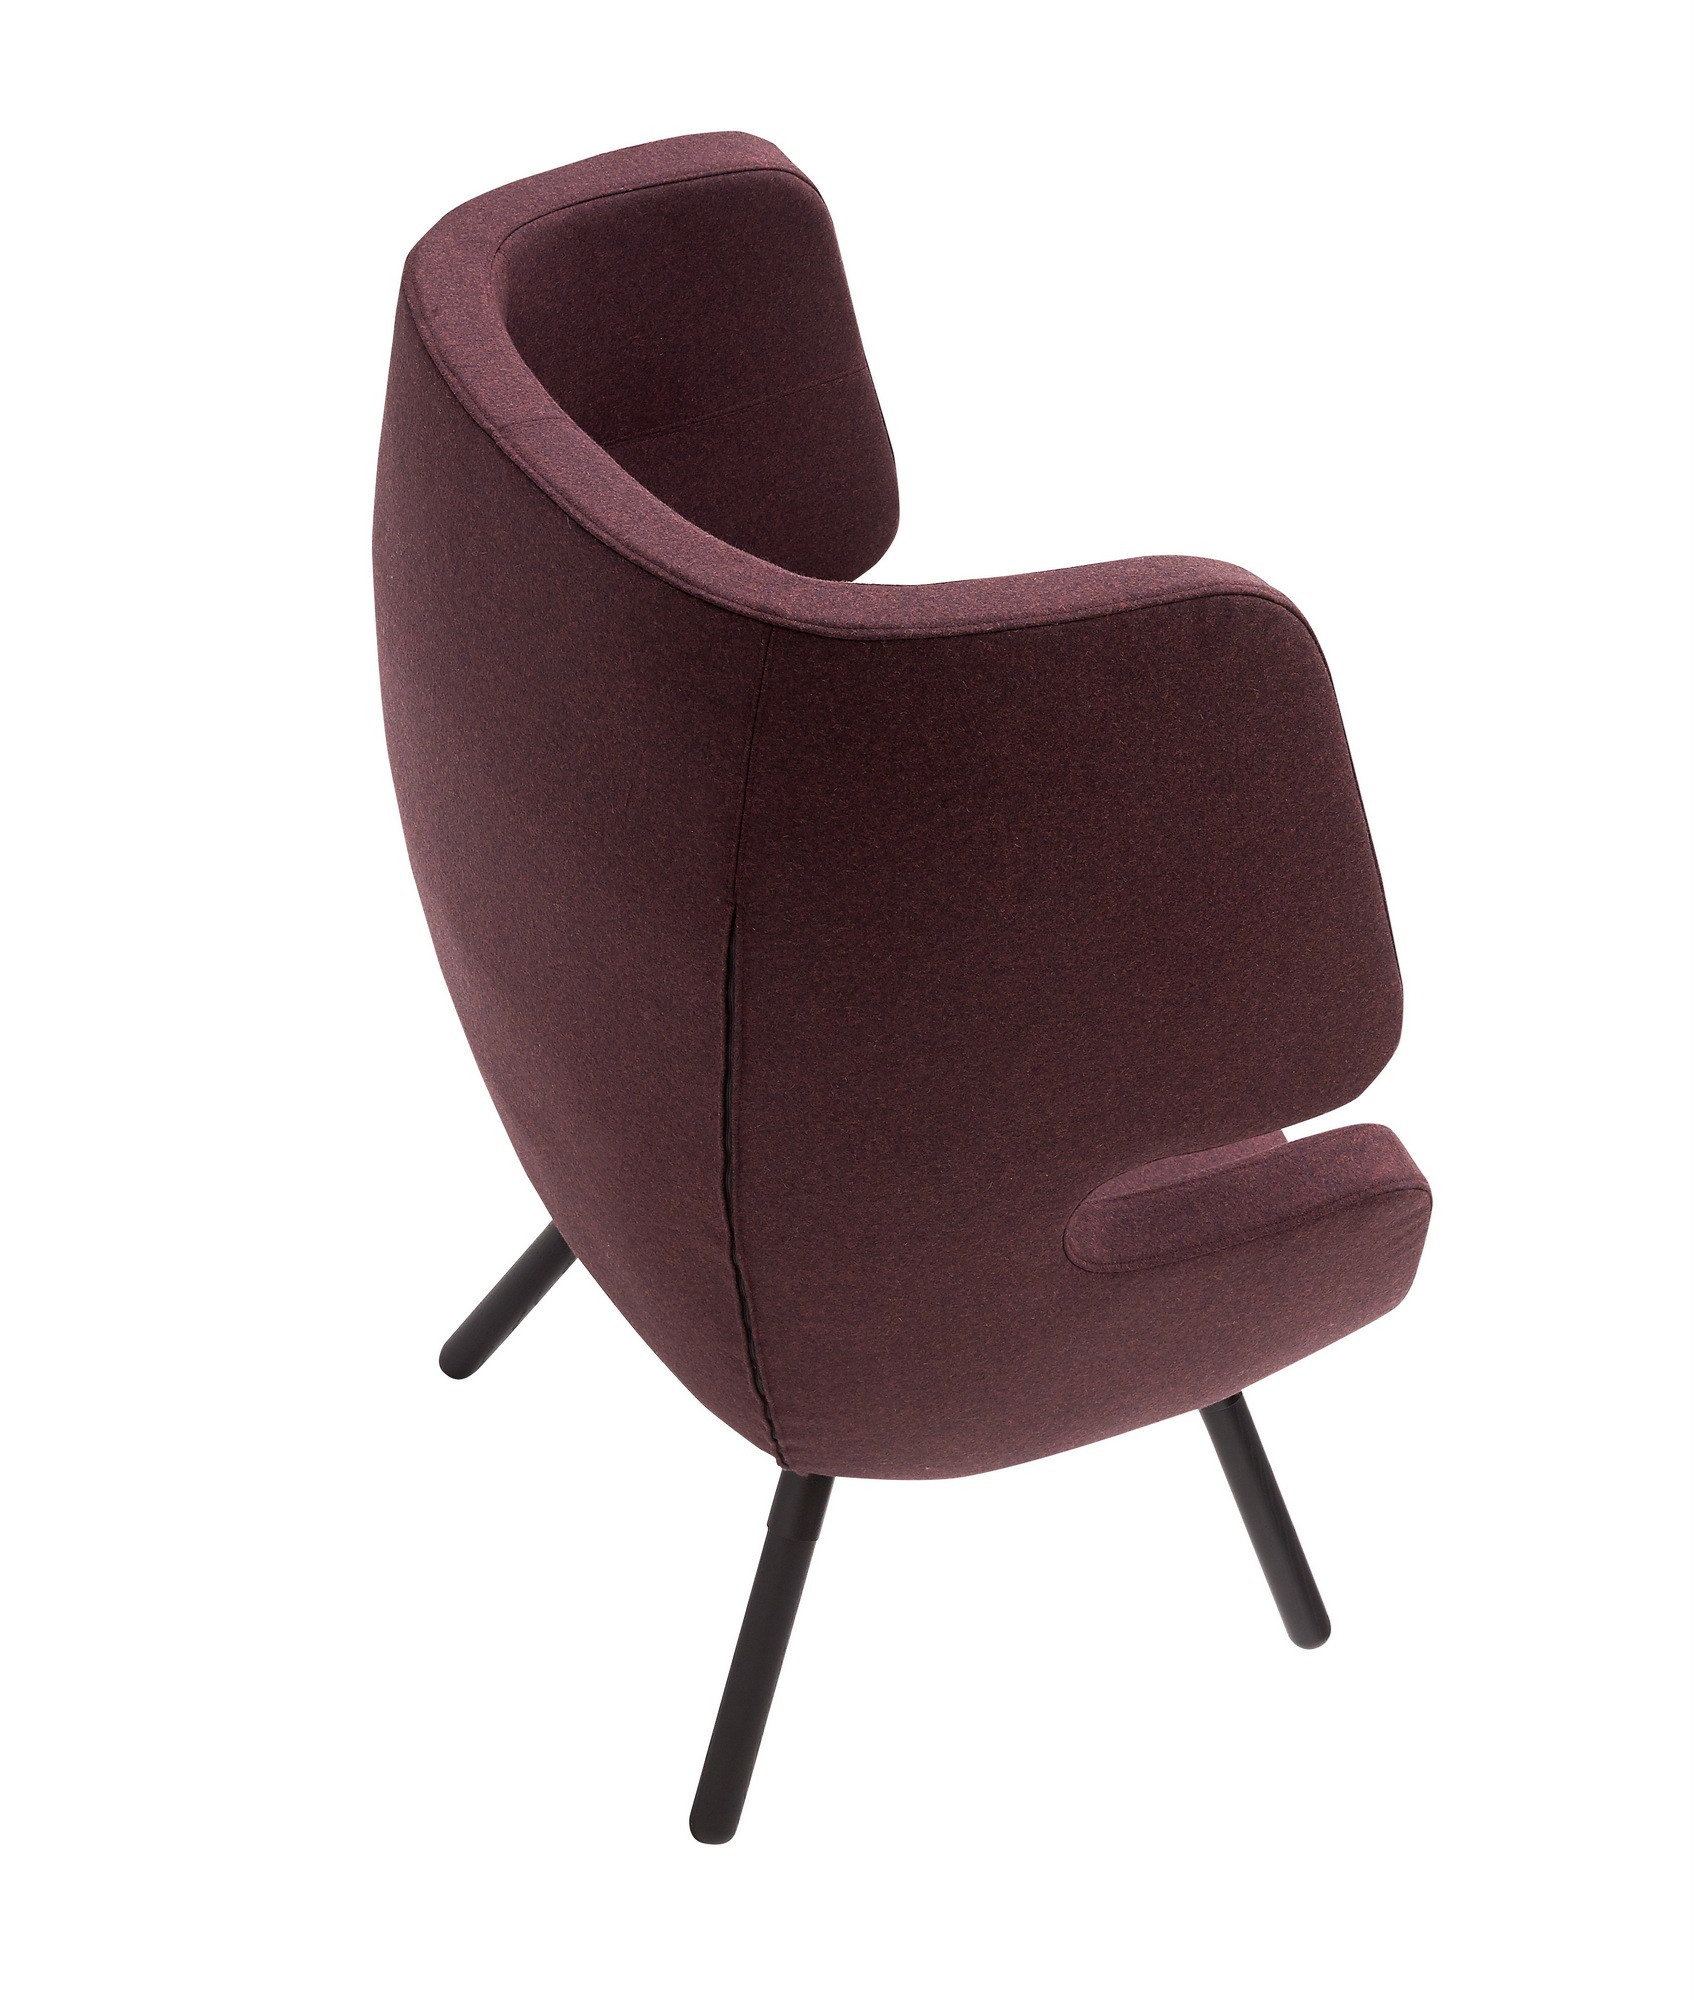 Moai Lounge Chair by Philip Bro for Softline